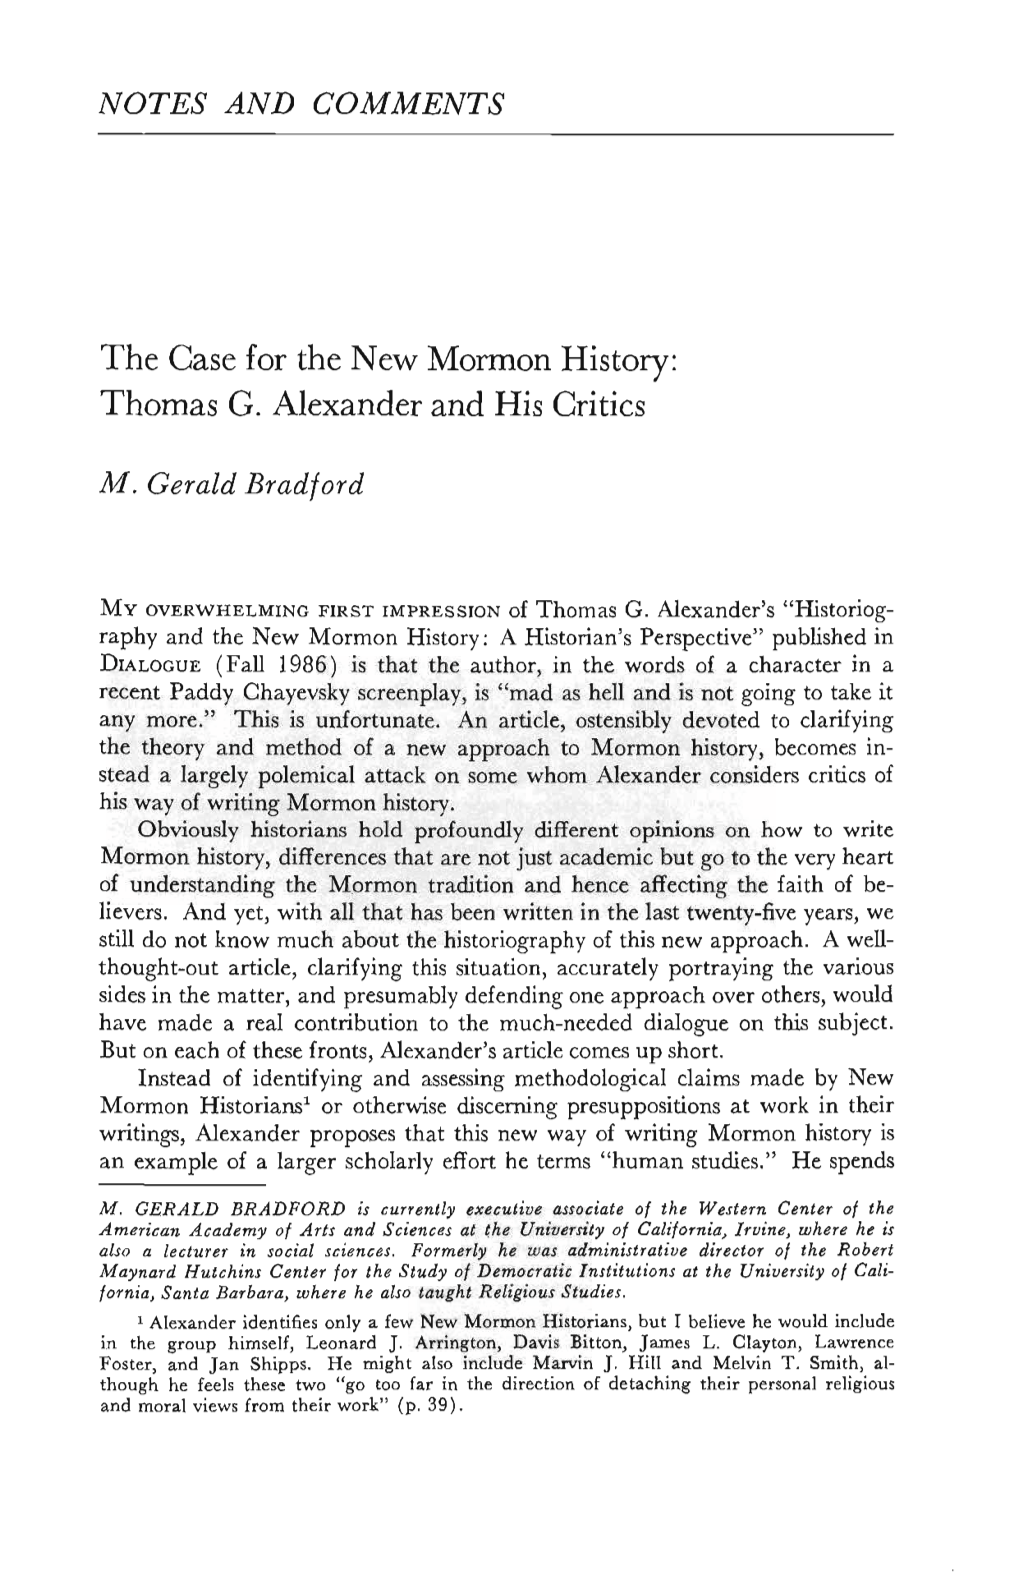 NOTES and COMMENTS the Case for the New Mormon History